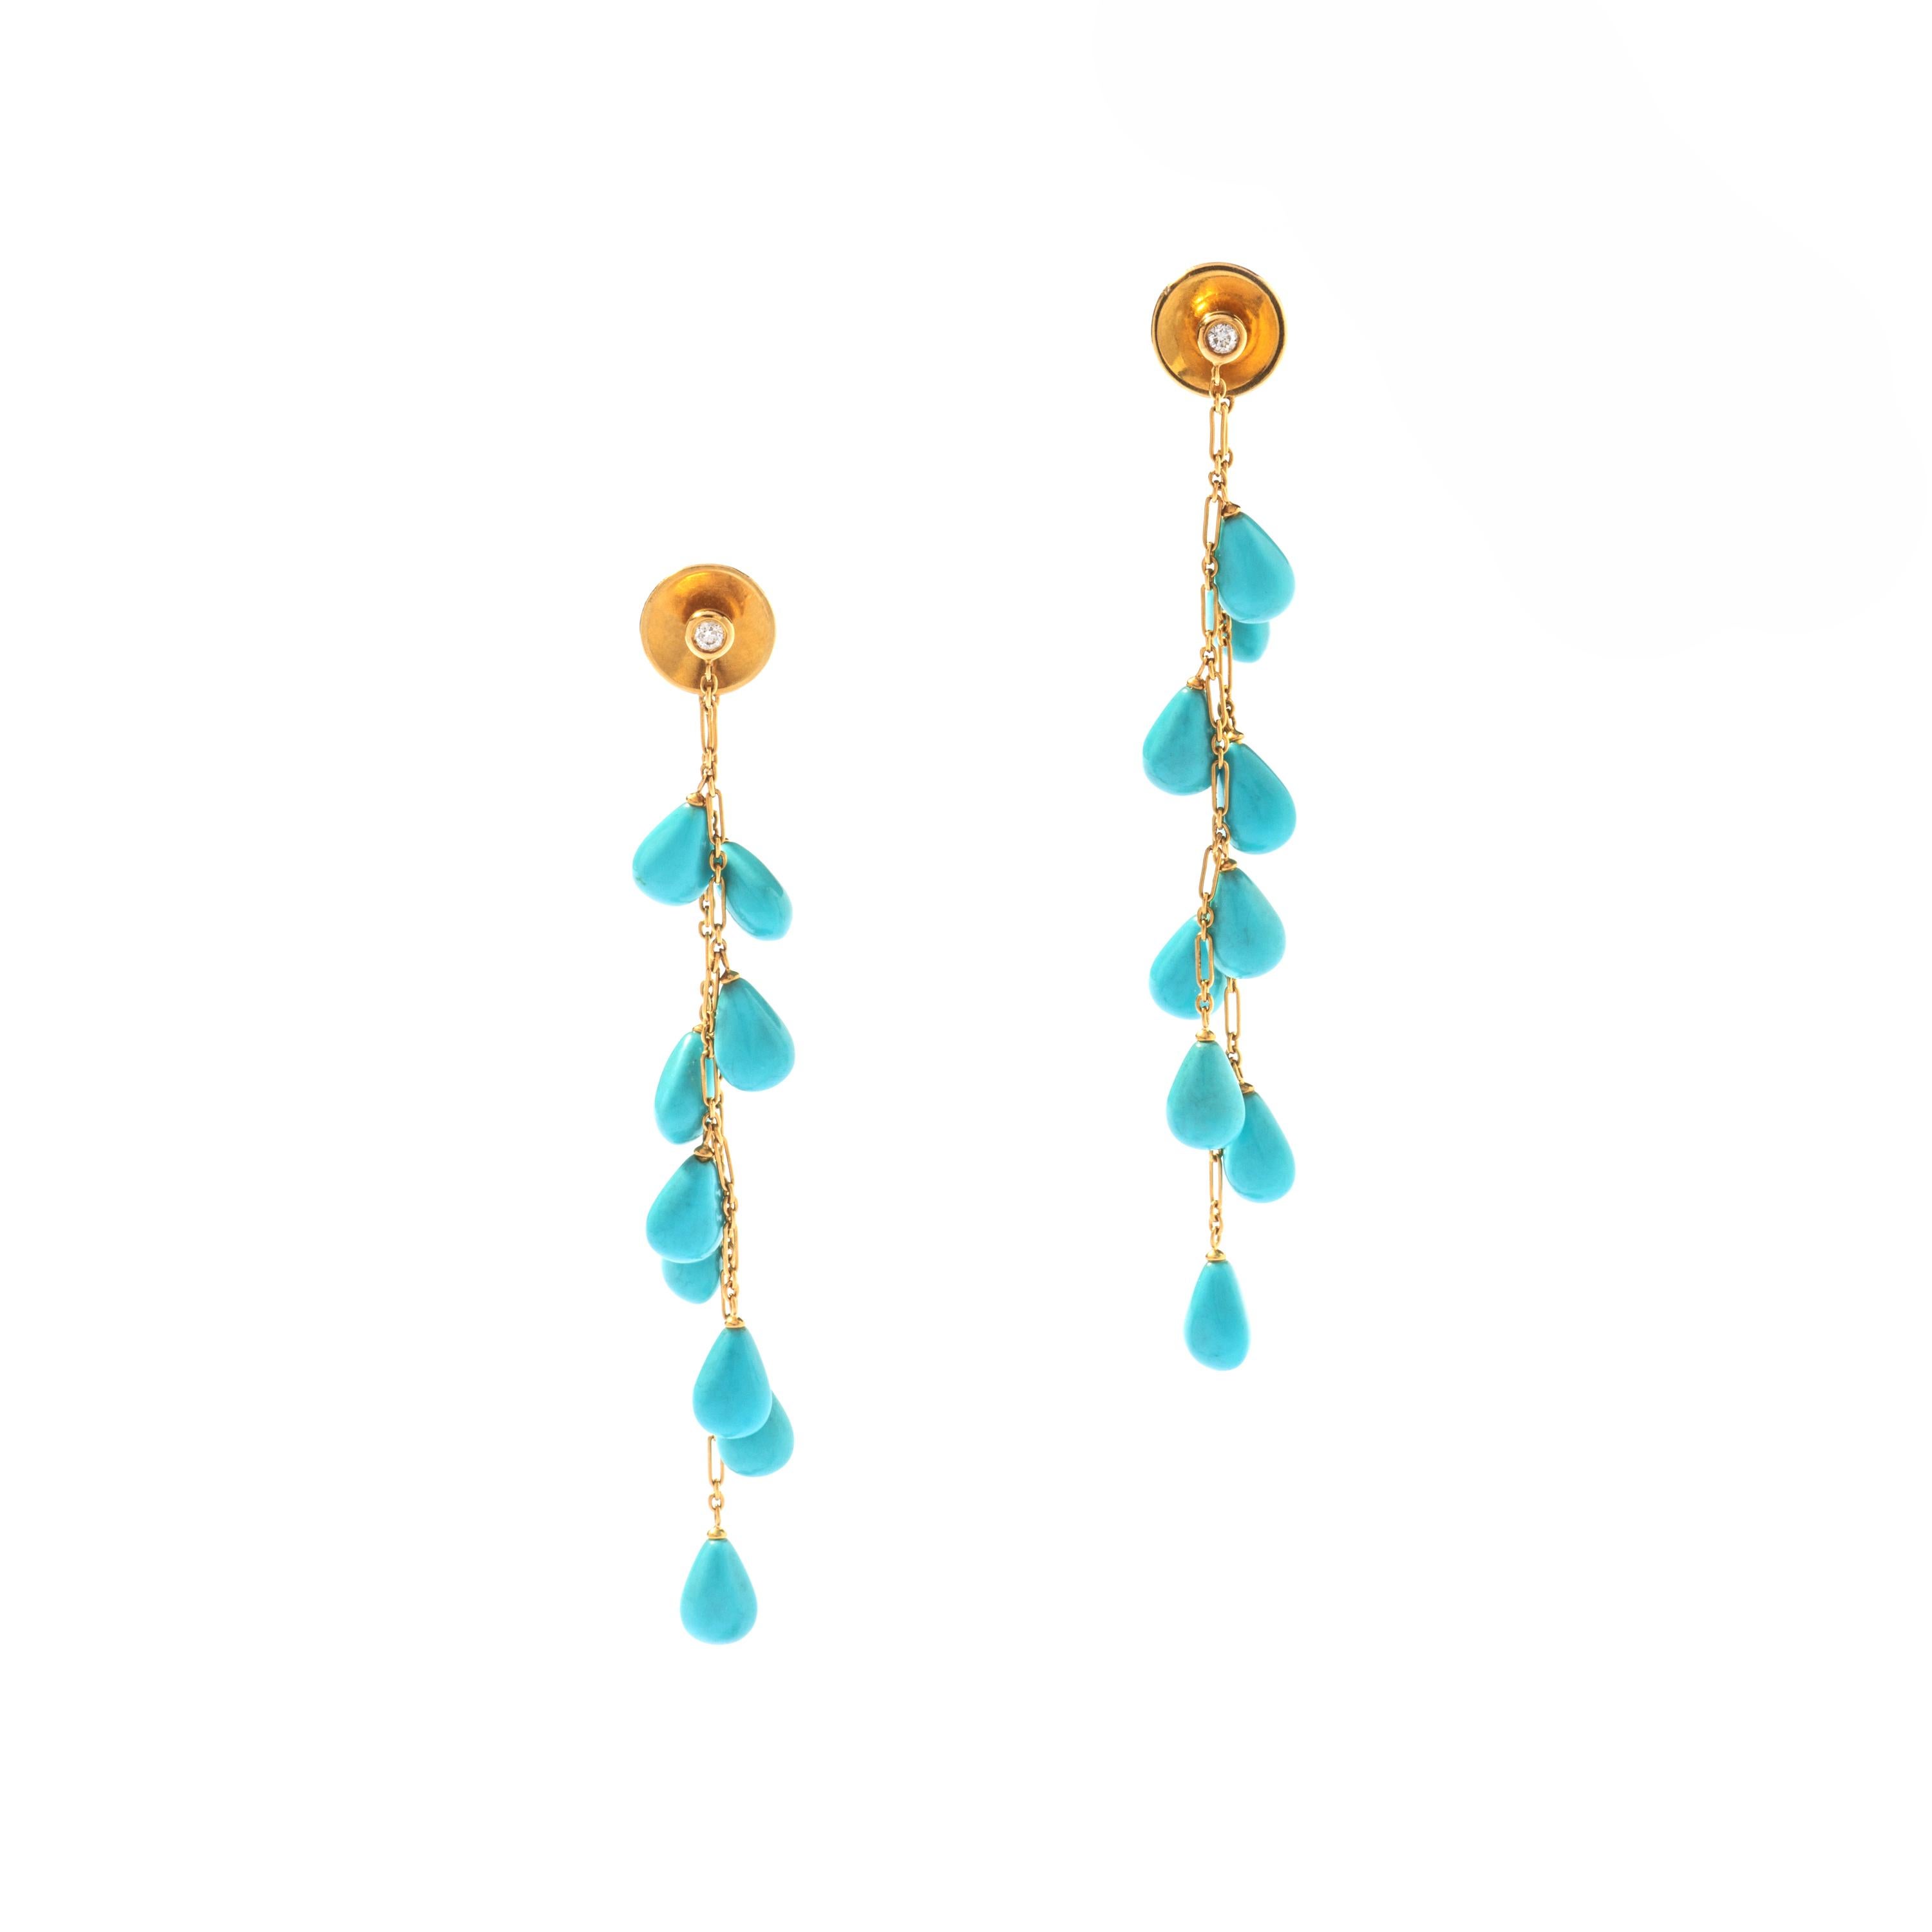 Turquoise drops and Diamond on yellow Gold 18k Ear pendants.
Circa 1980.

Total height: 7.50 centimeters
Total weight: 8.59 grams